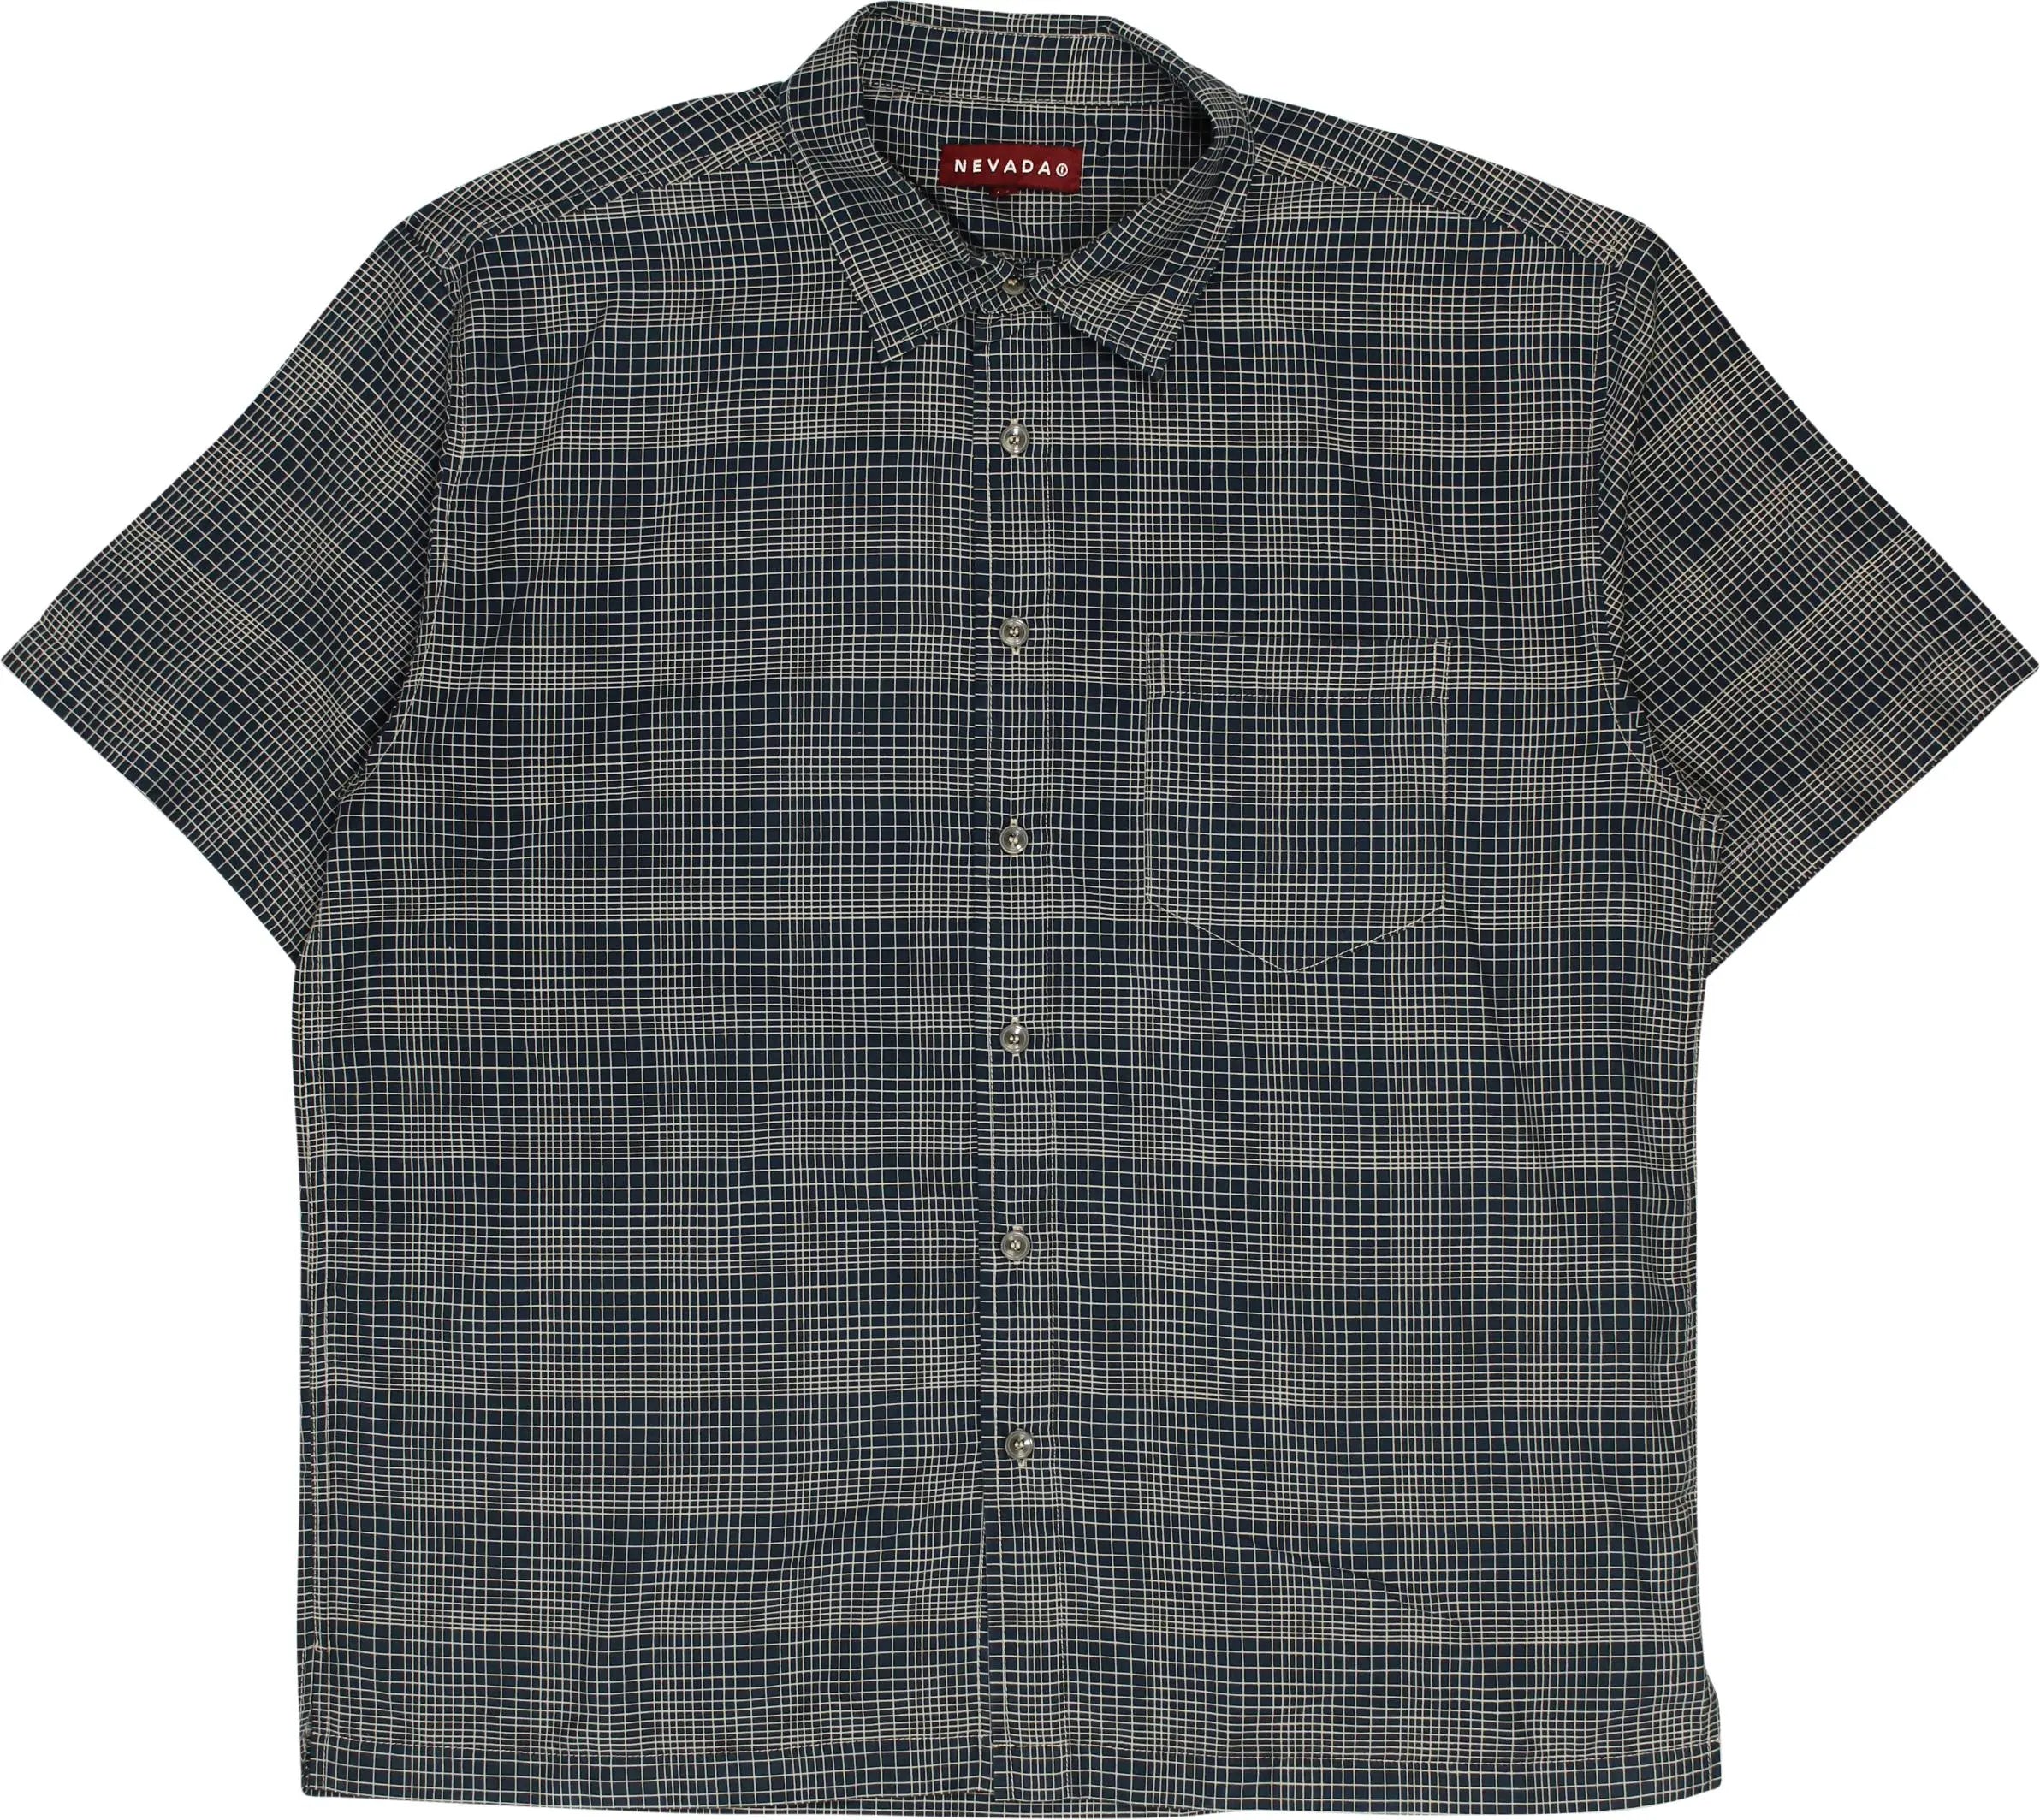 Nevada - 00s Checked Shirt- ThriftTale.com - Vintage and second handclothing